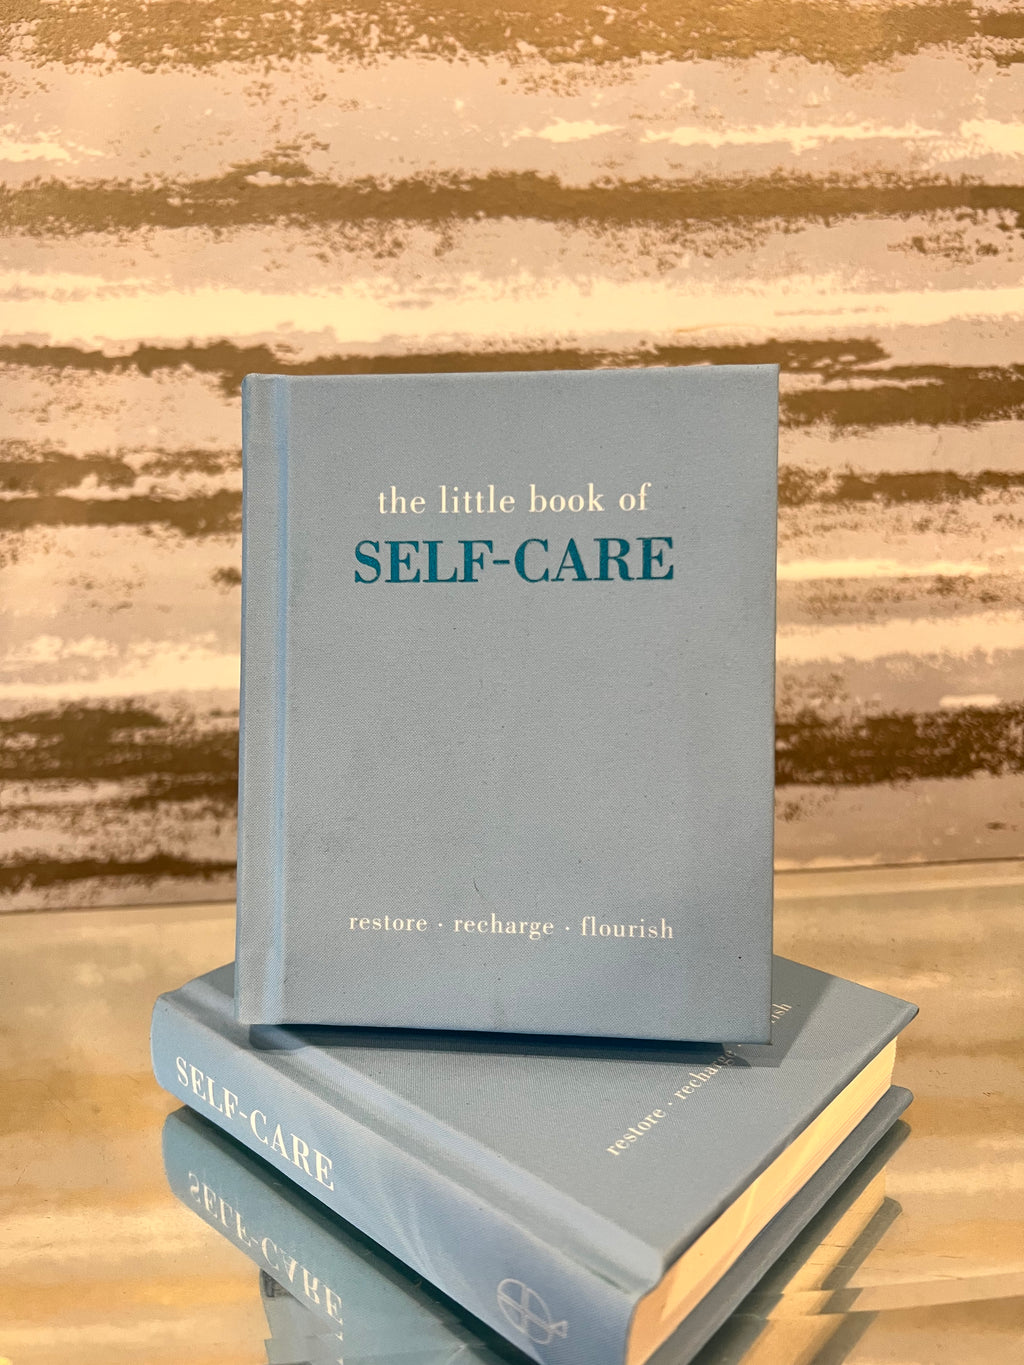 THE LITTLE BOOK OF SELF-CARE